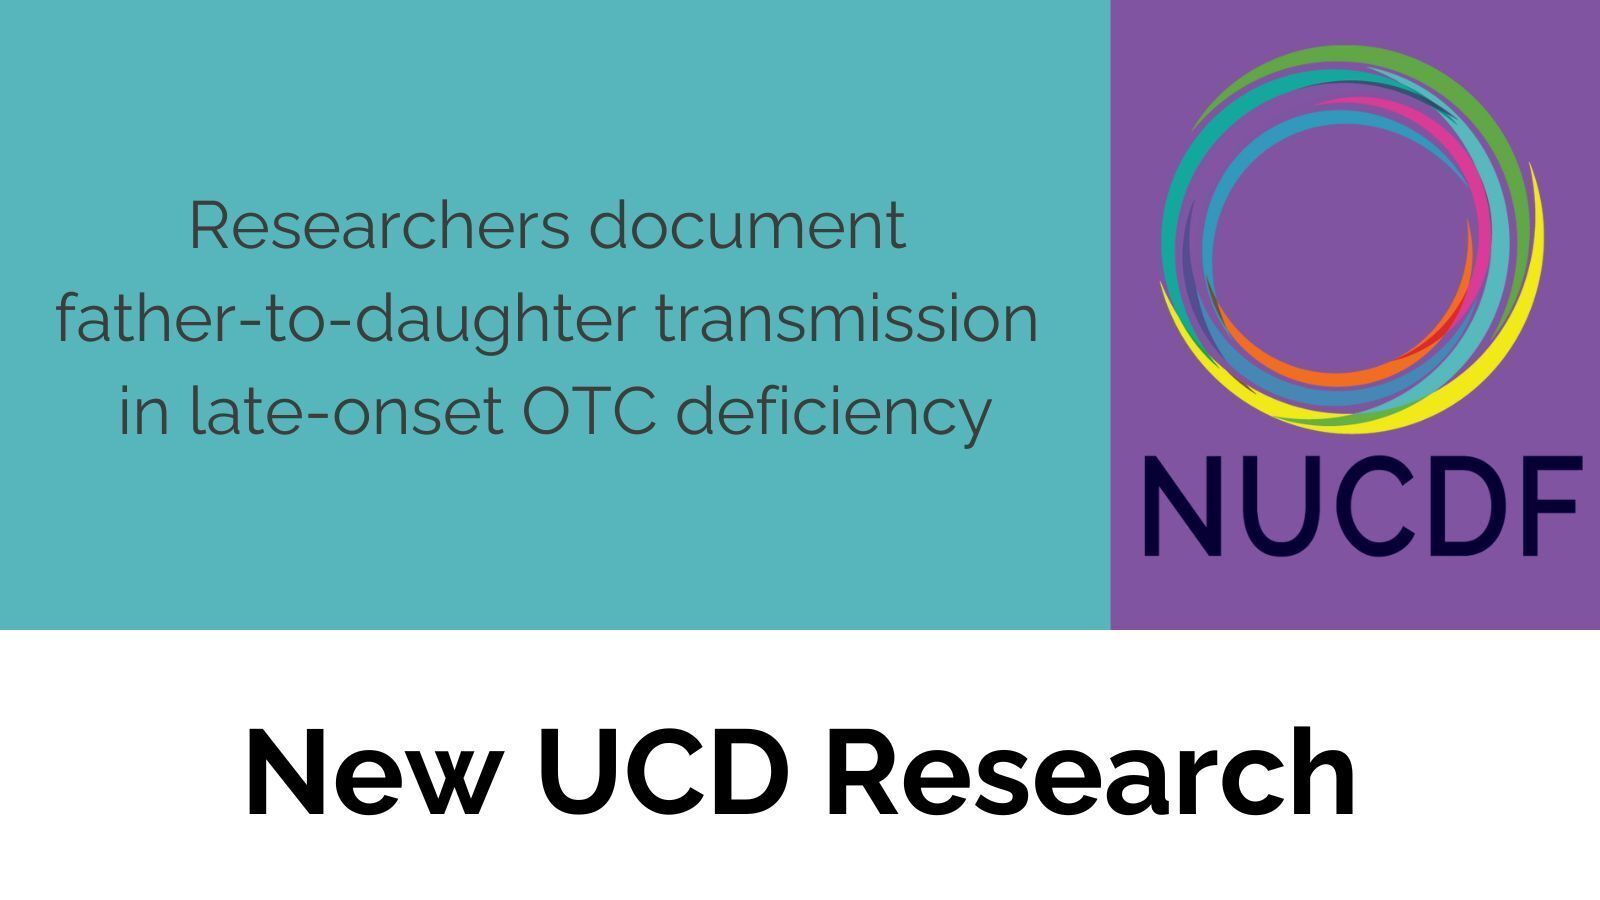 New UCD research: Researchers document father-to-daughter transmission in late-onset OTC deficiency